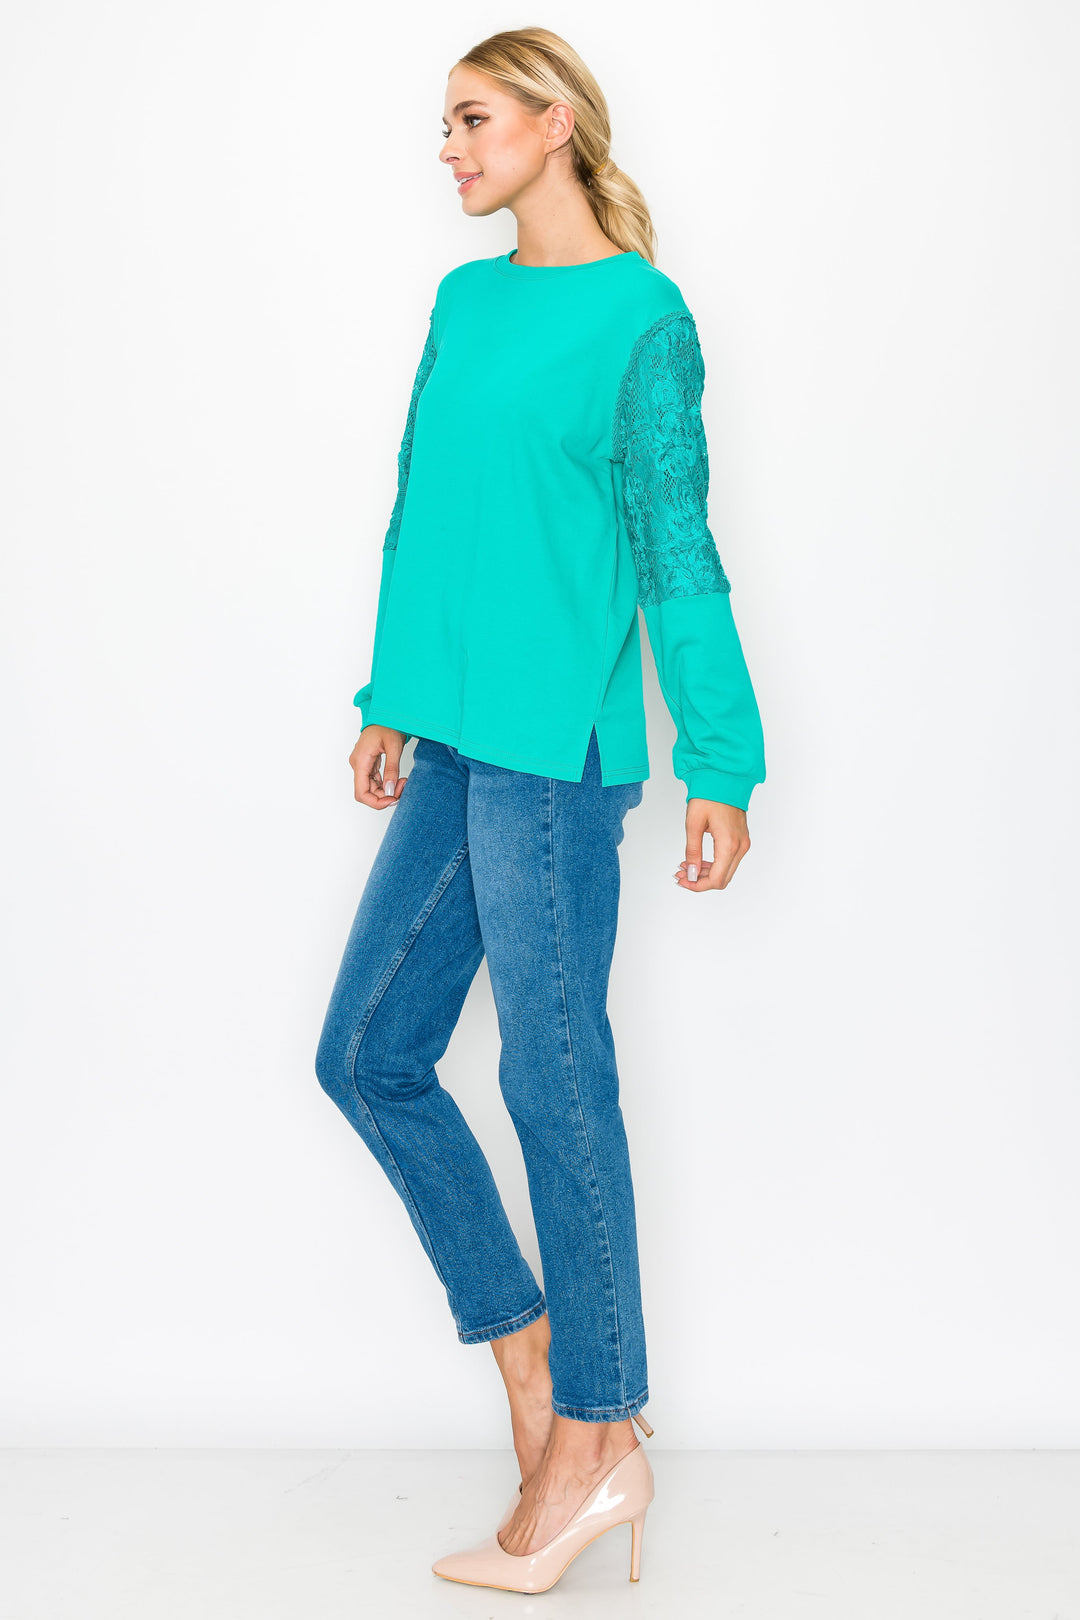 Rylee Pointe Knit Top with Lace